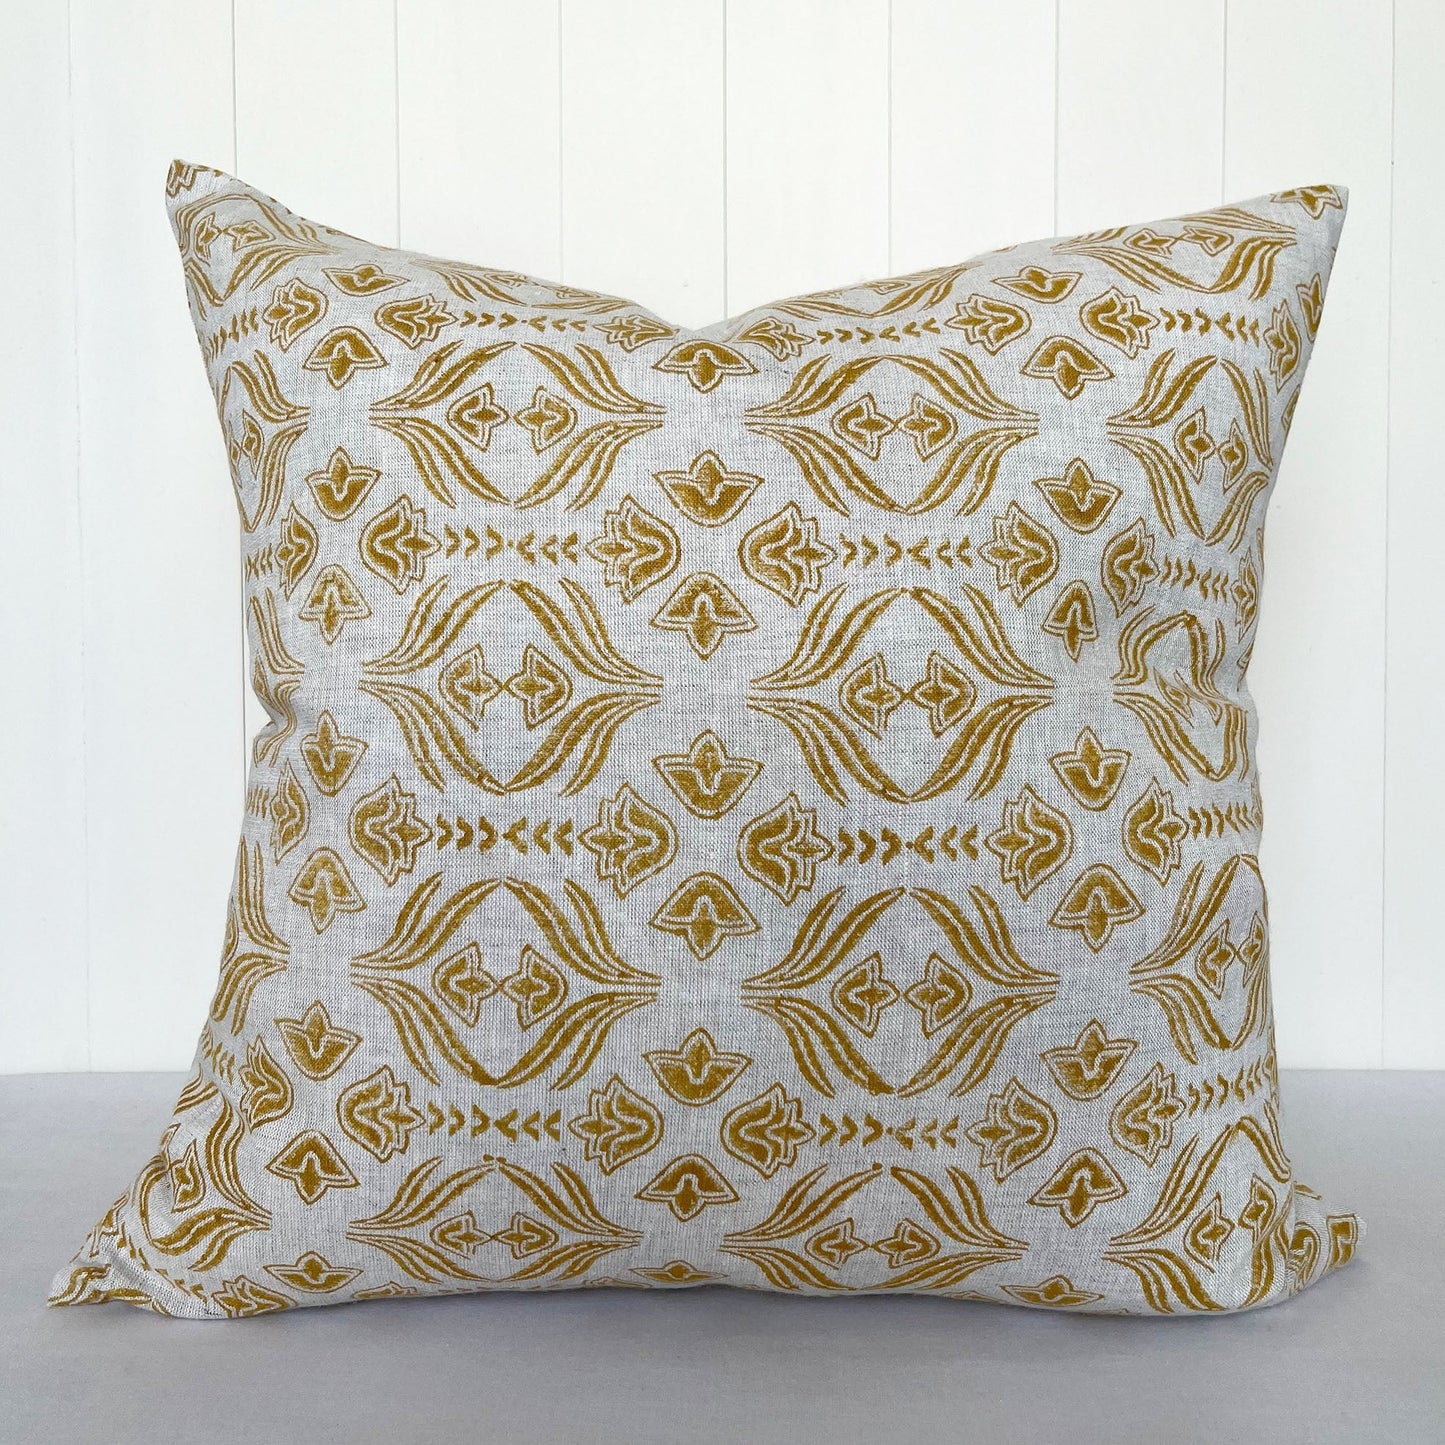 Square throw pillow featuring hand block printed floral pattern. Natural colored linen is stamped with a golden yellow pattern.